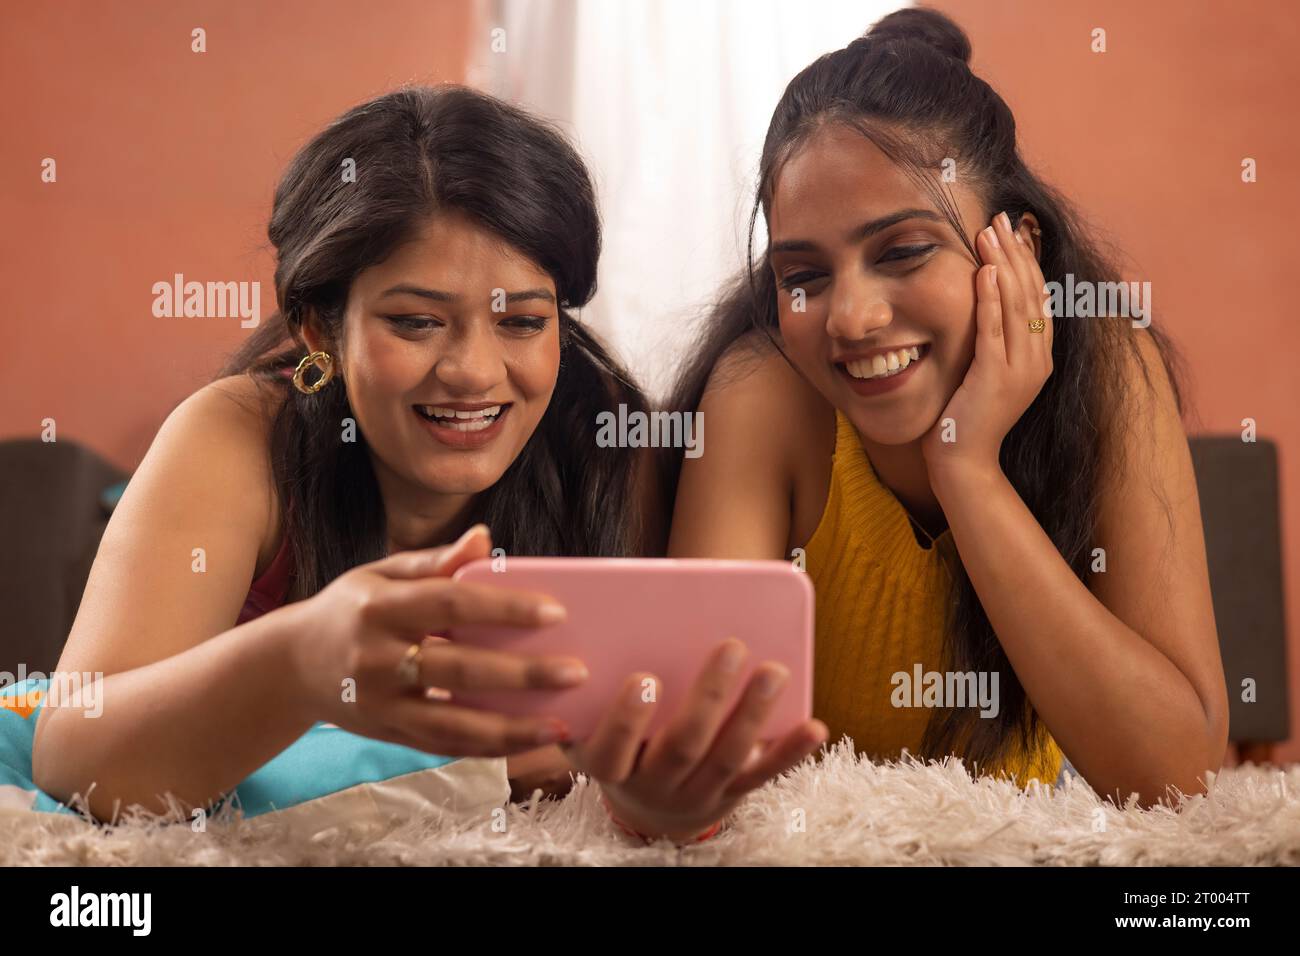 Close-up portrait of two smiling women together watching video on mobile phone while lying on floor in living room Stock Photo